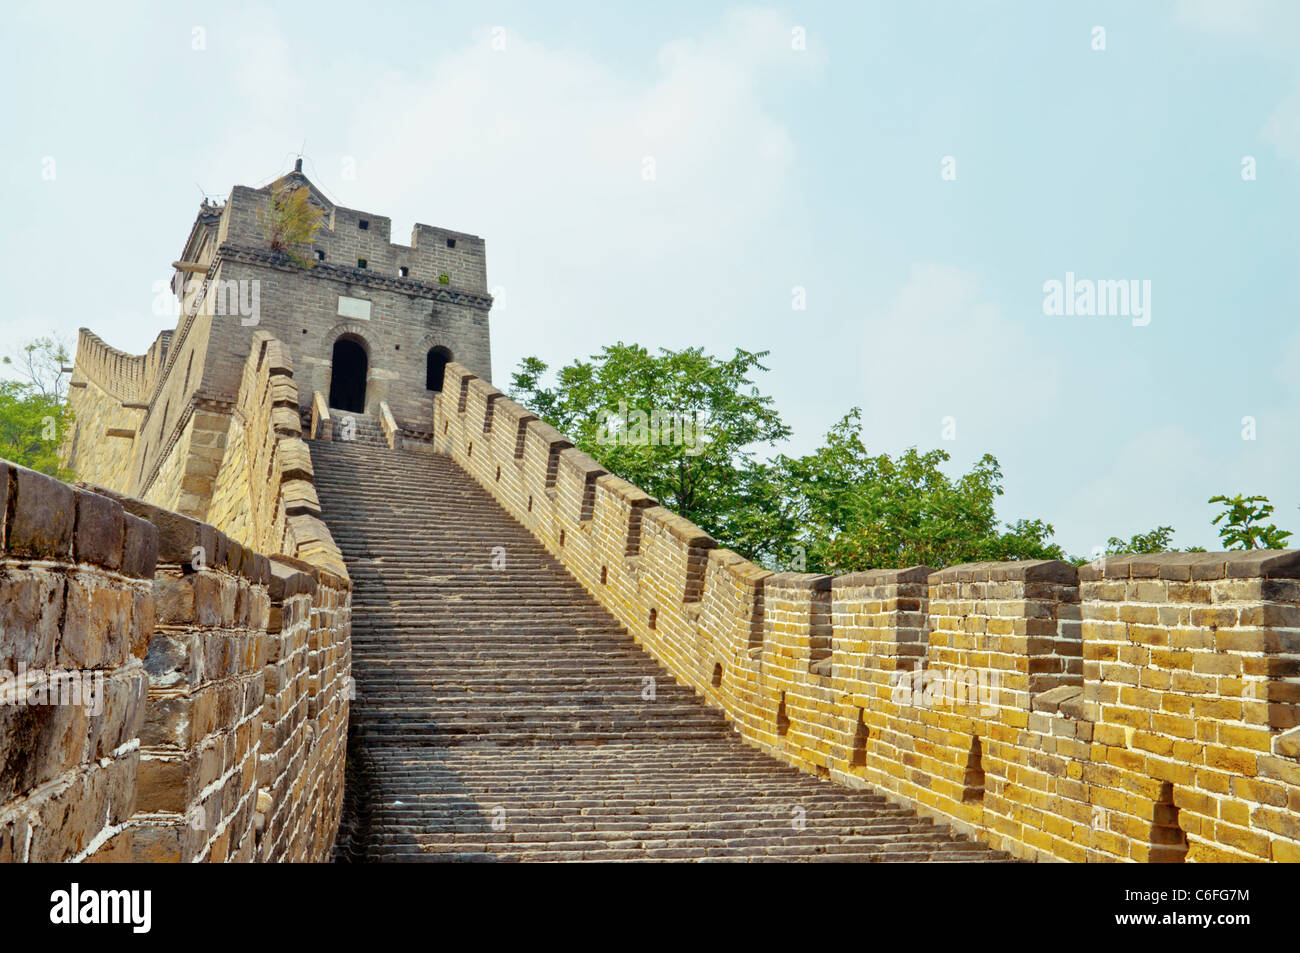 Section of The Great Wall in mutianyu site, China Stock Photo